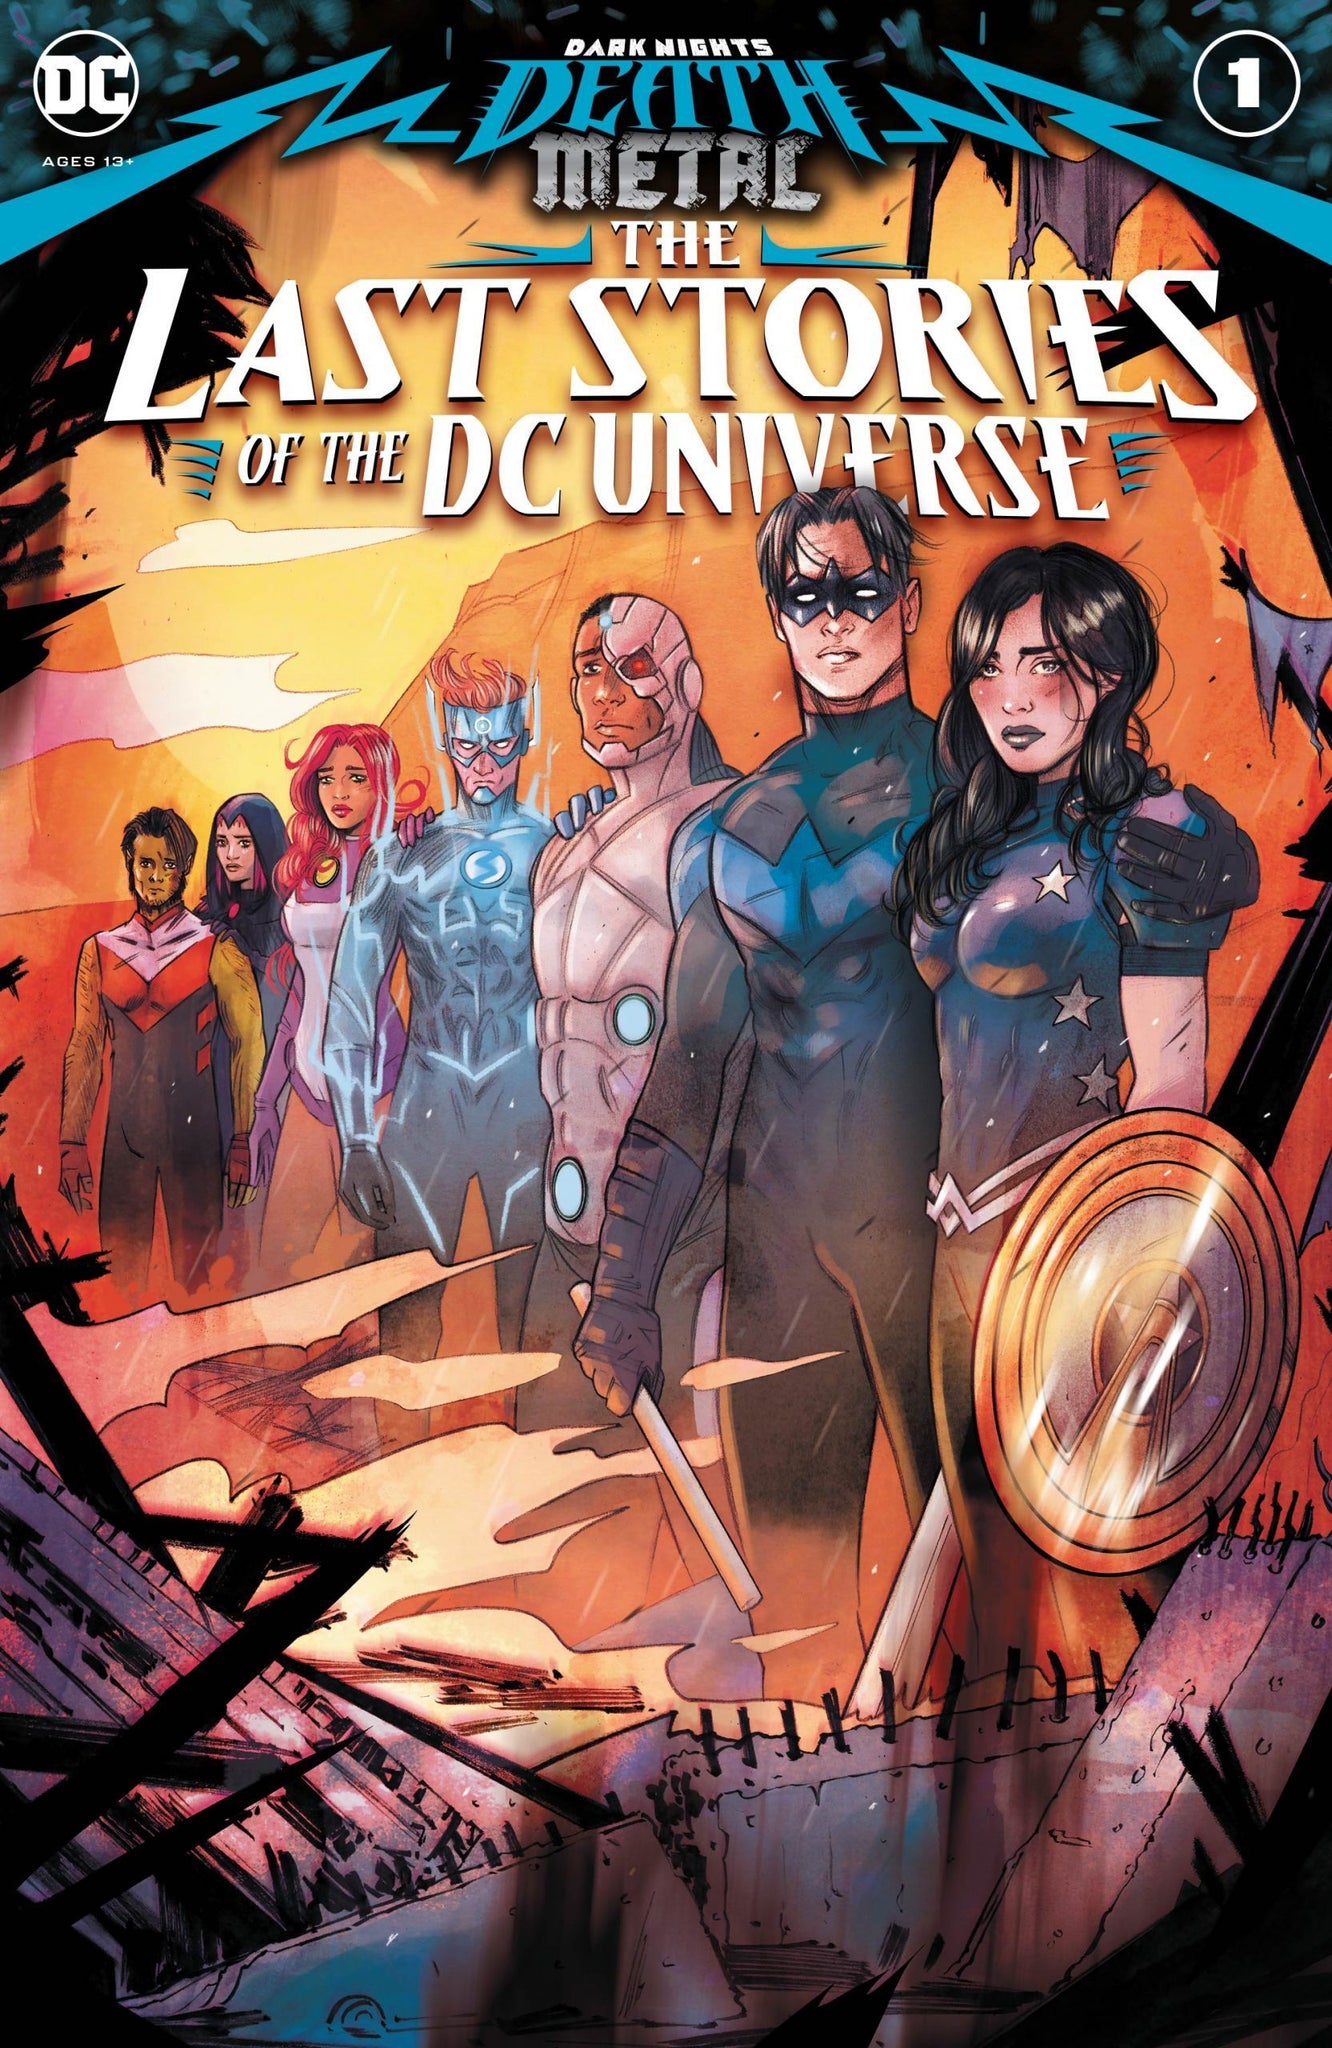 THIS WEEK: As a lead-in to the end of an event that has been hit or miss, and as we speed towards Future State and status quo changes, Dark Nights: Death Metal: Last Stories of the DC Universe gives us a farewell filled with fan service.